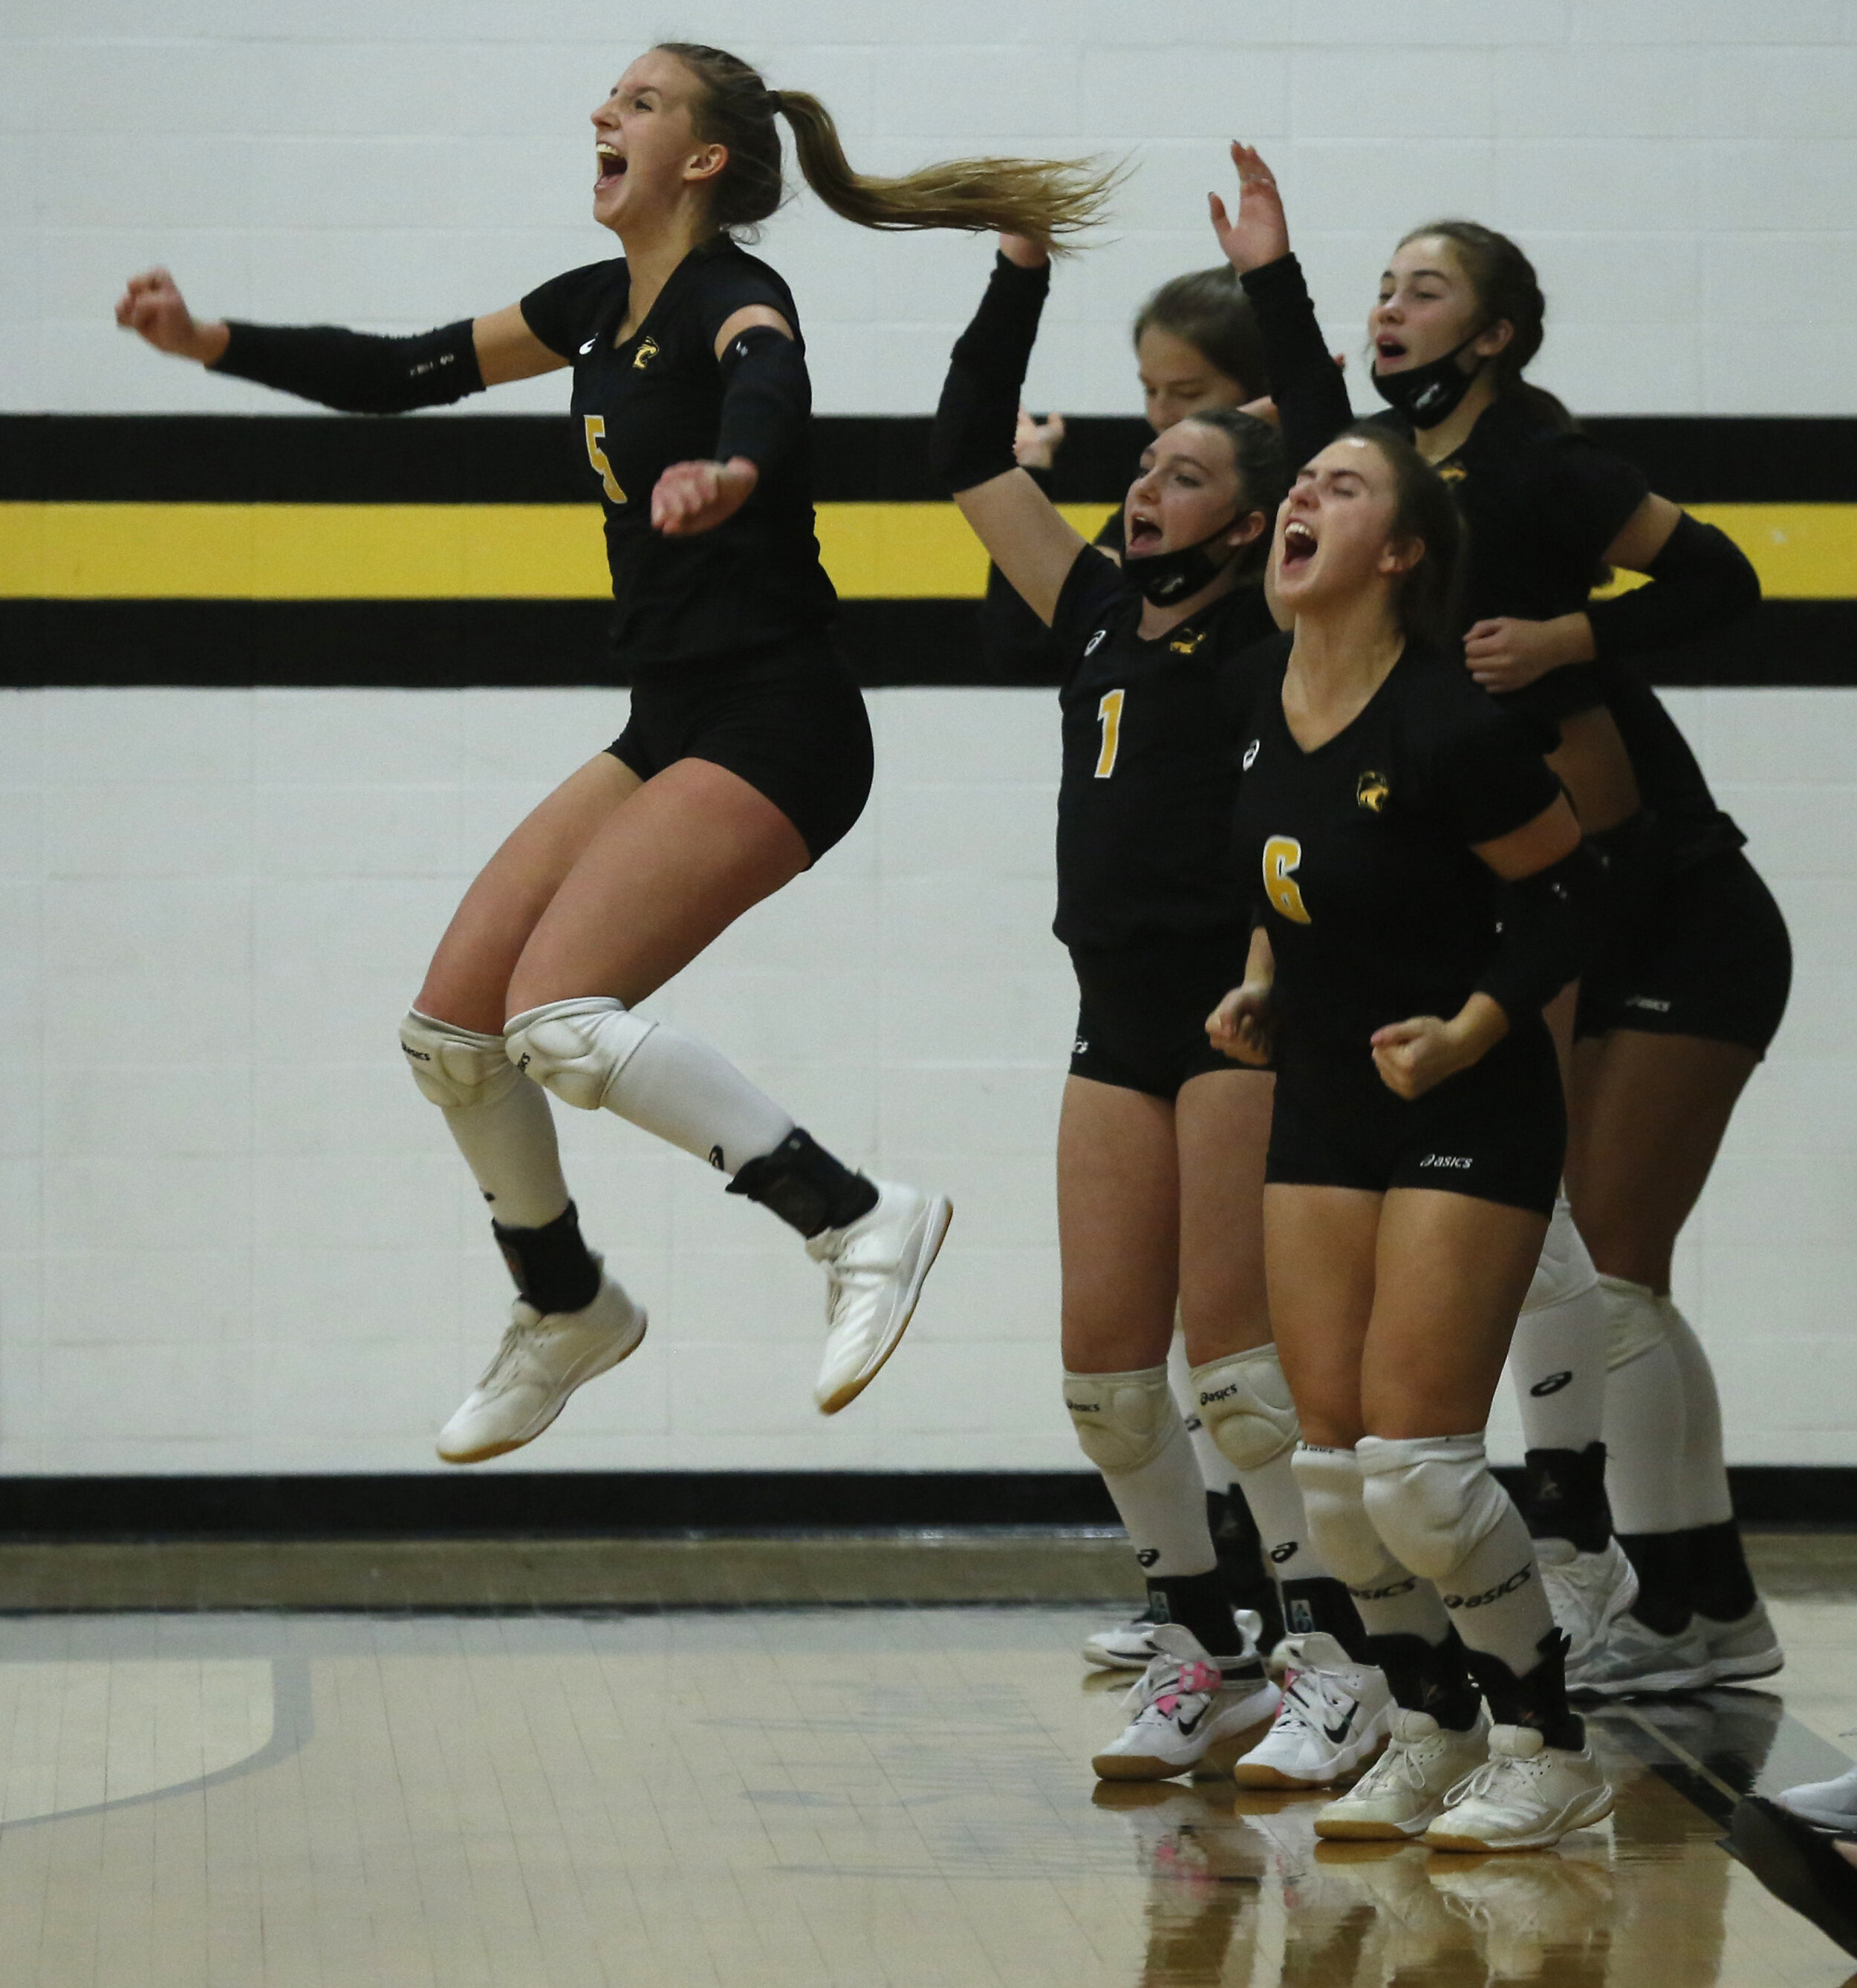  Northview’s Madi Taylor leaps in the air as she reacts to her team scoring against Perrysburg during the Div. 1 district volleyball final at Northview in Sylvania, Ohio. © Toledo Blade | October 2020 